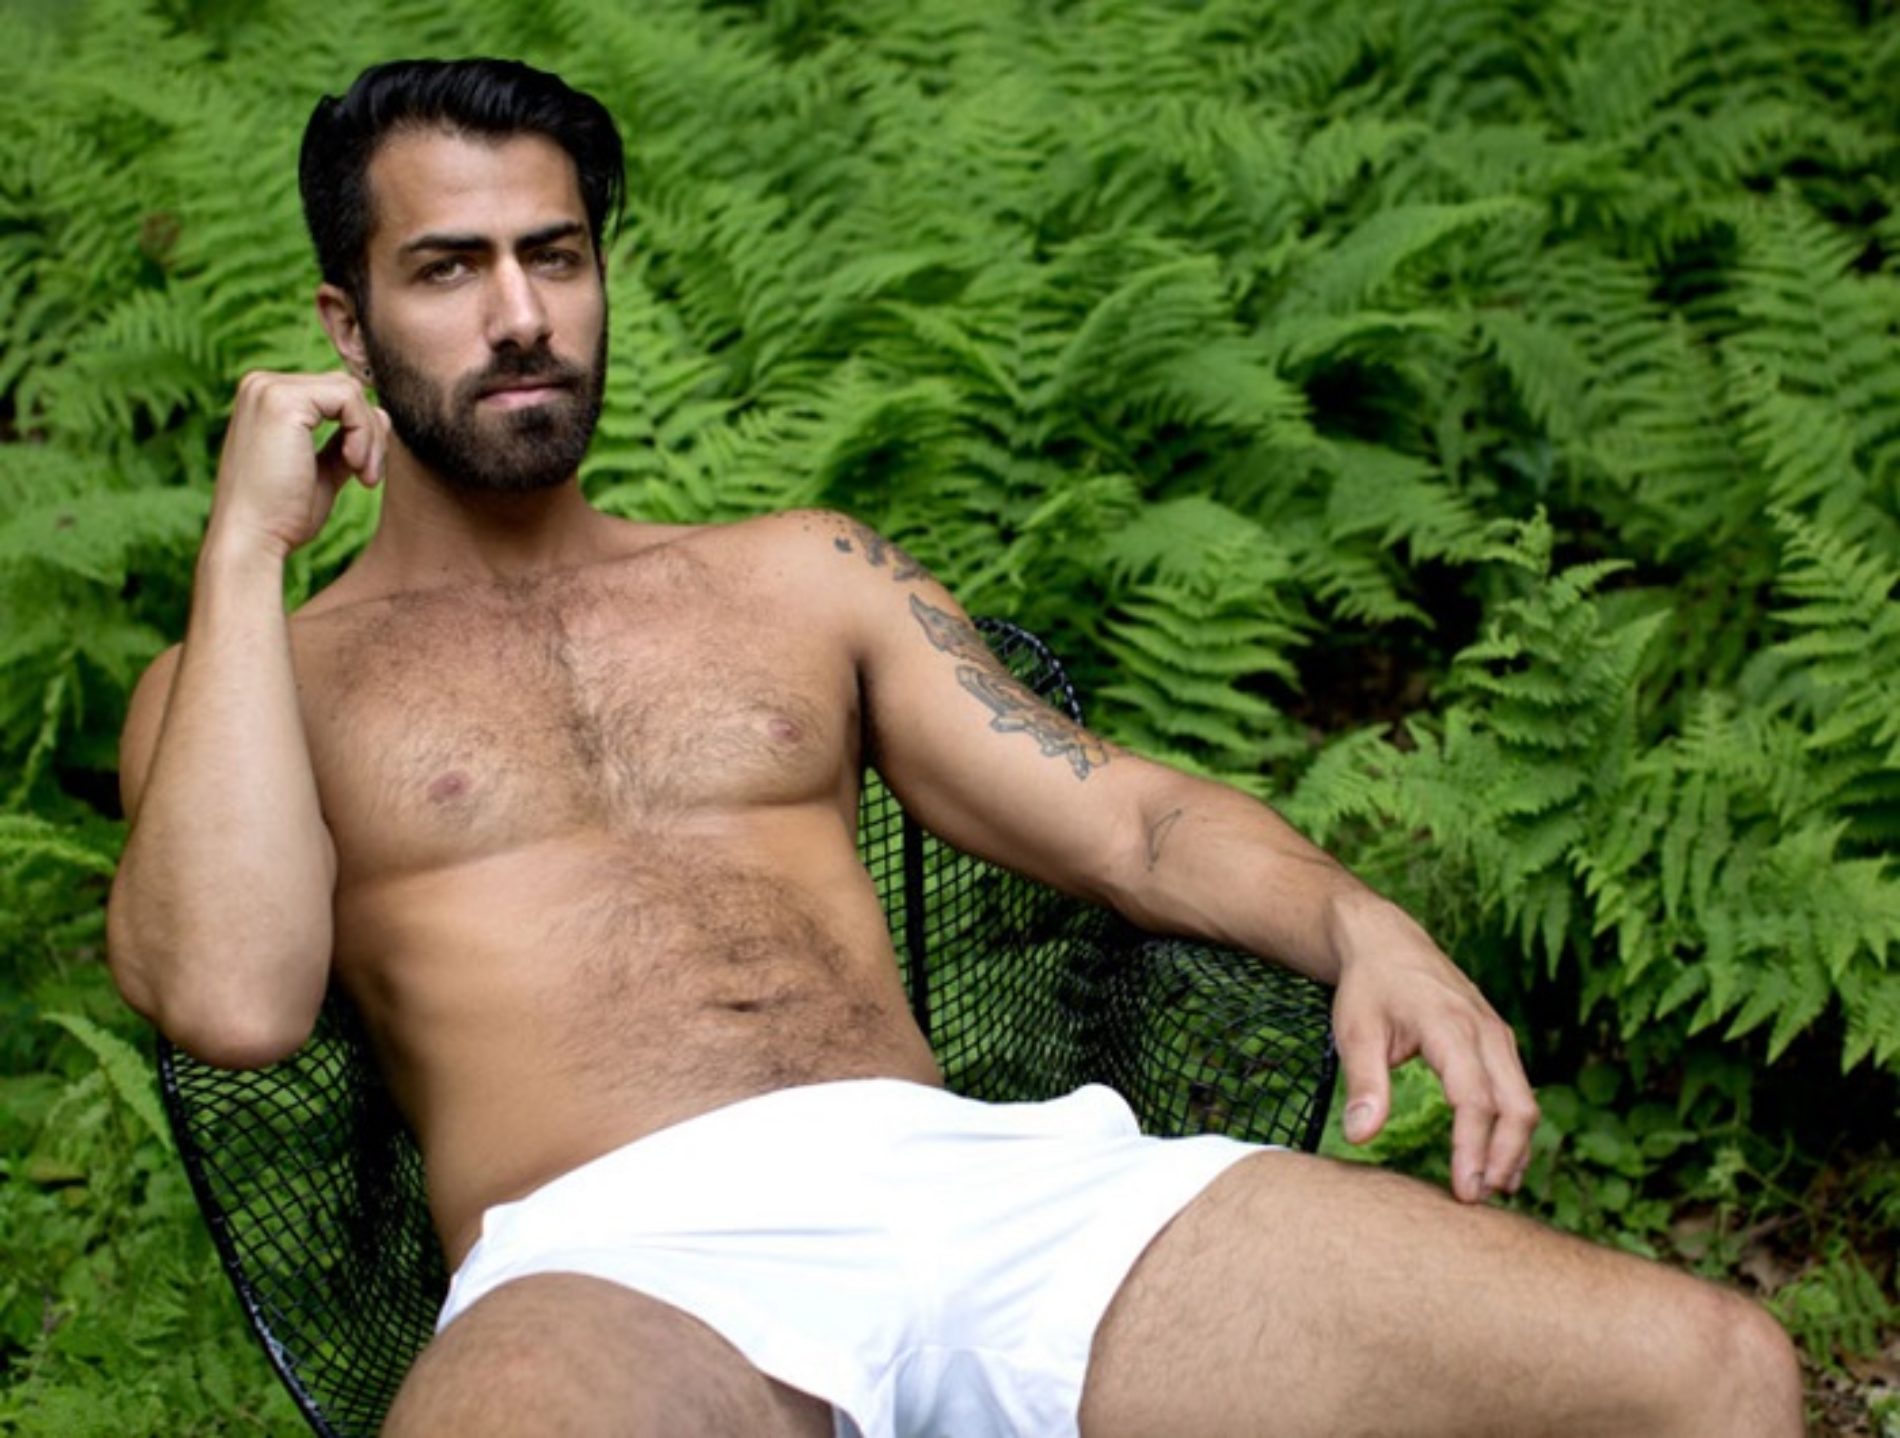 “If I Don’t Feel Shame, Then No One Can Shame Me For What I Do.” – Porn Star Adam Ramzi